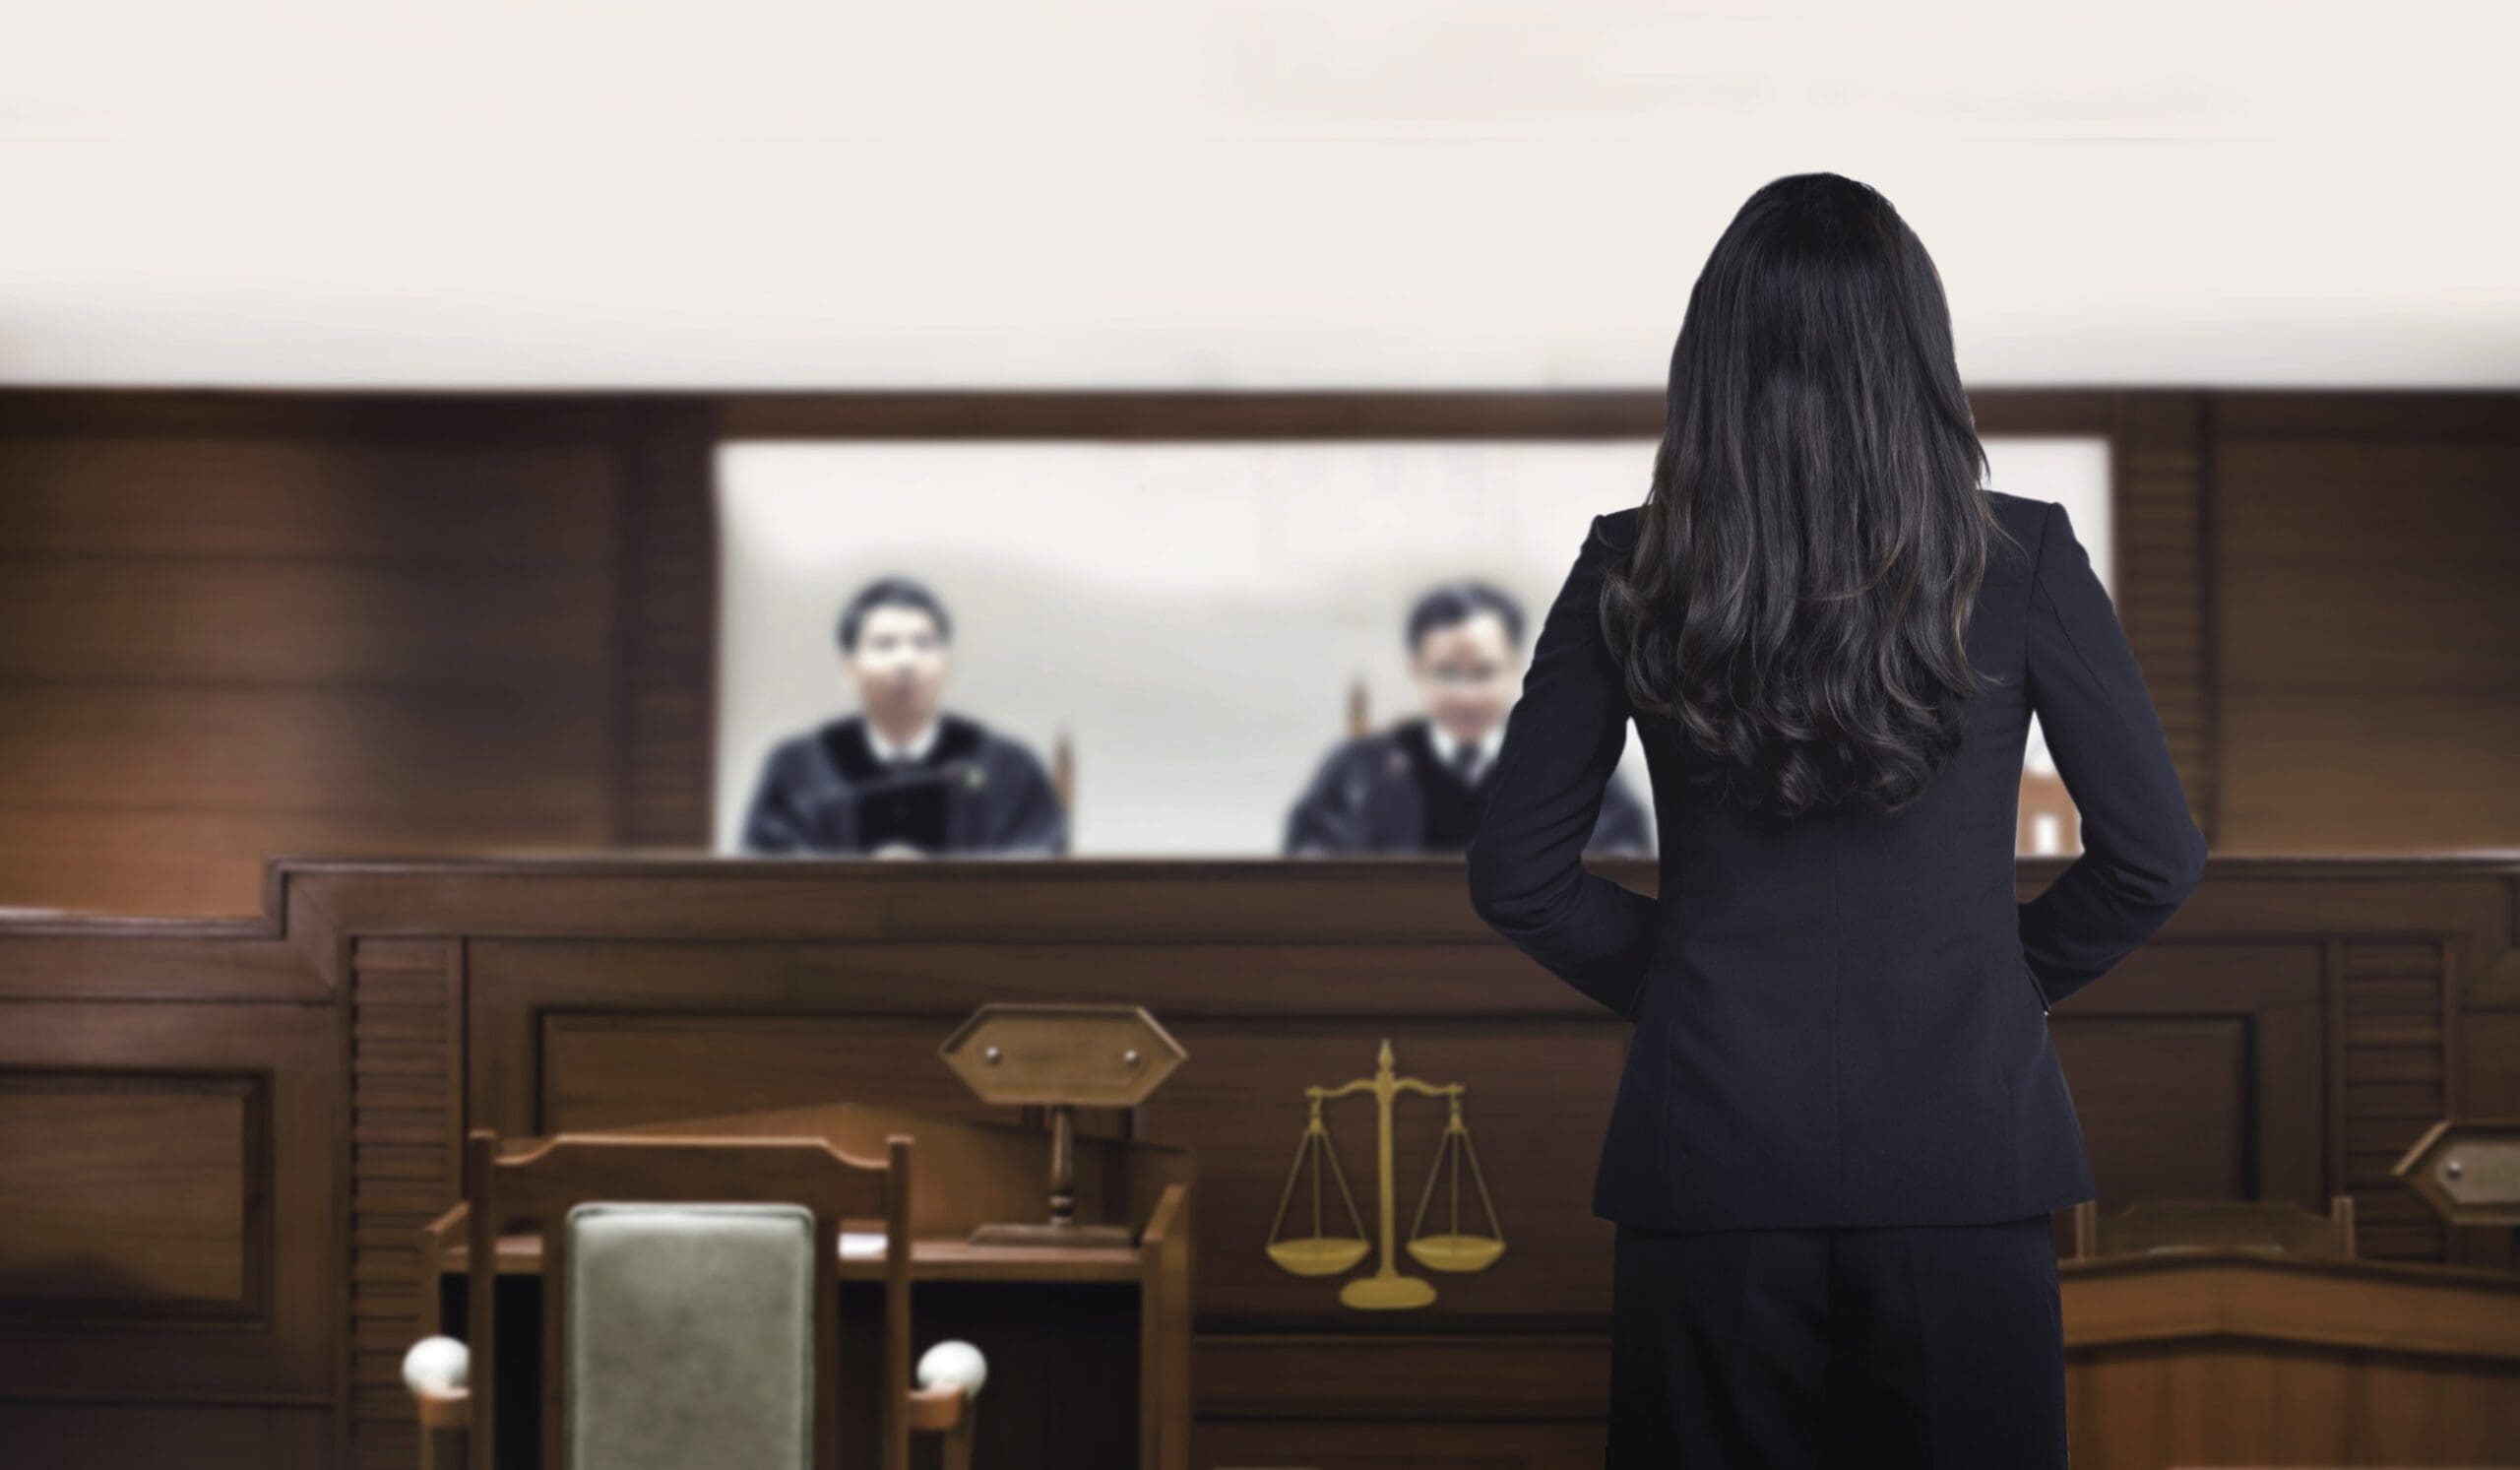 Self Represented Litigants: 5 Rules for Presenting Evidence in Court